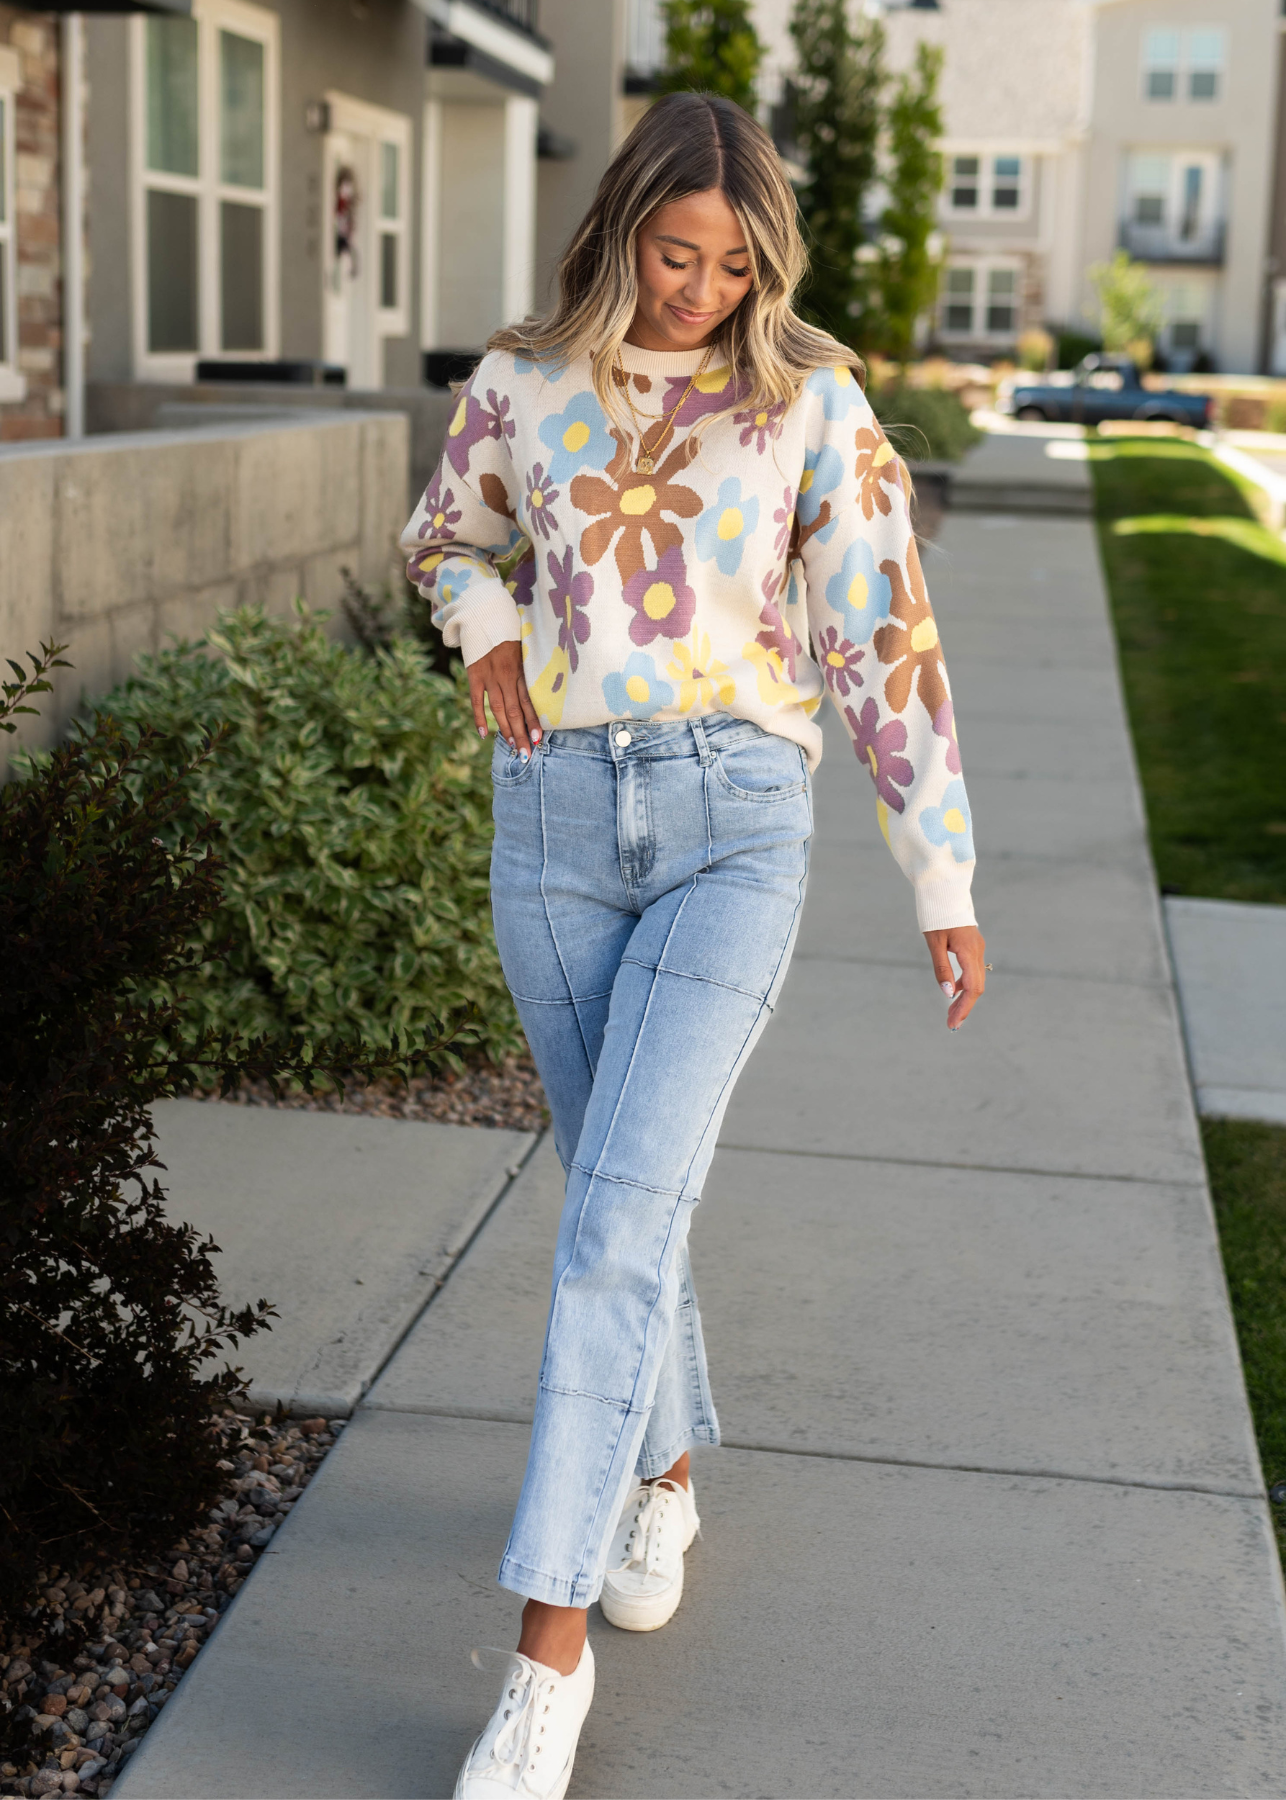 Cream sweater with flower print and light denim jeans that are sold separately